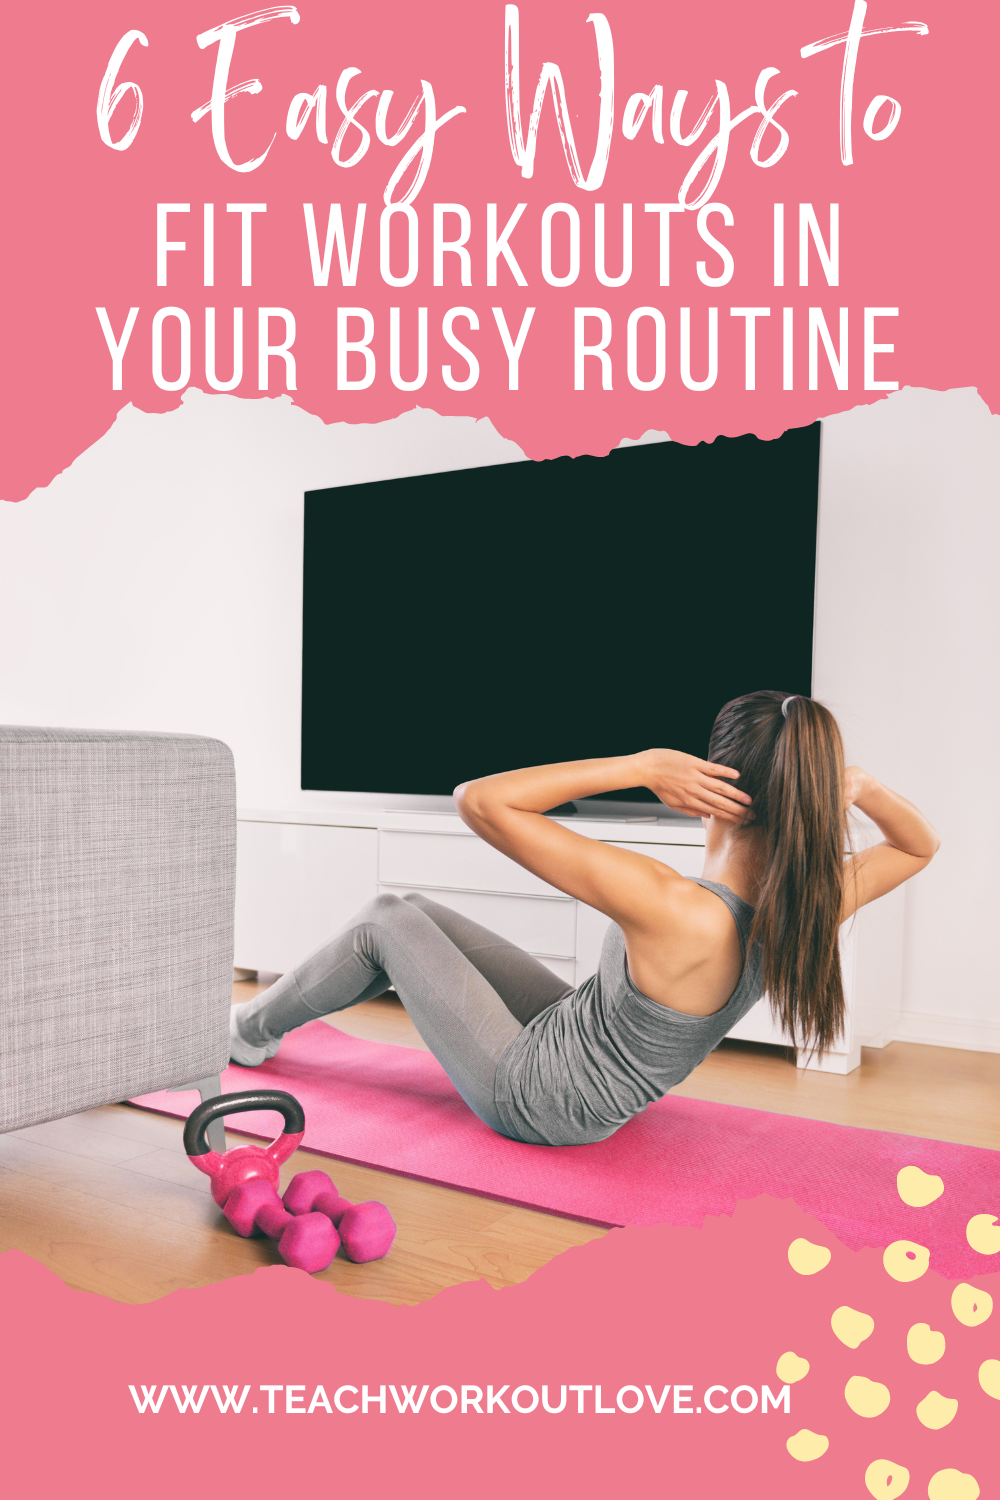 Being a busy working mom, it is hard to fit a workout into your routine! Here are some practical ways to fit exercise into your busy schedule for lasting results.